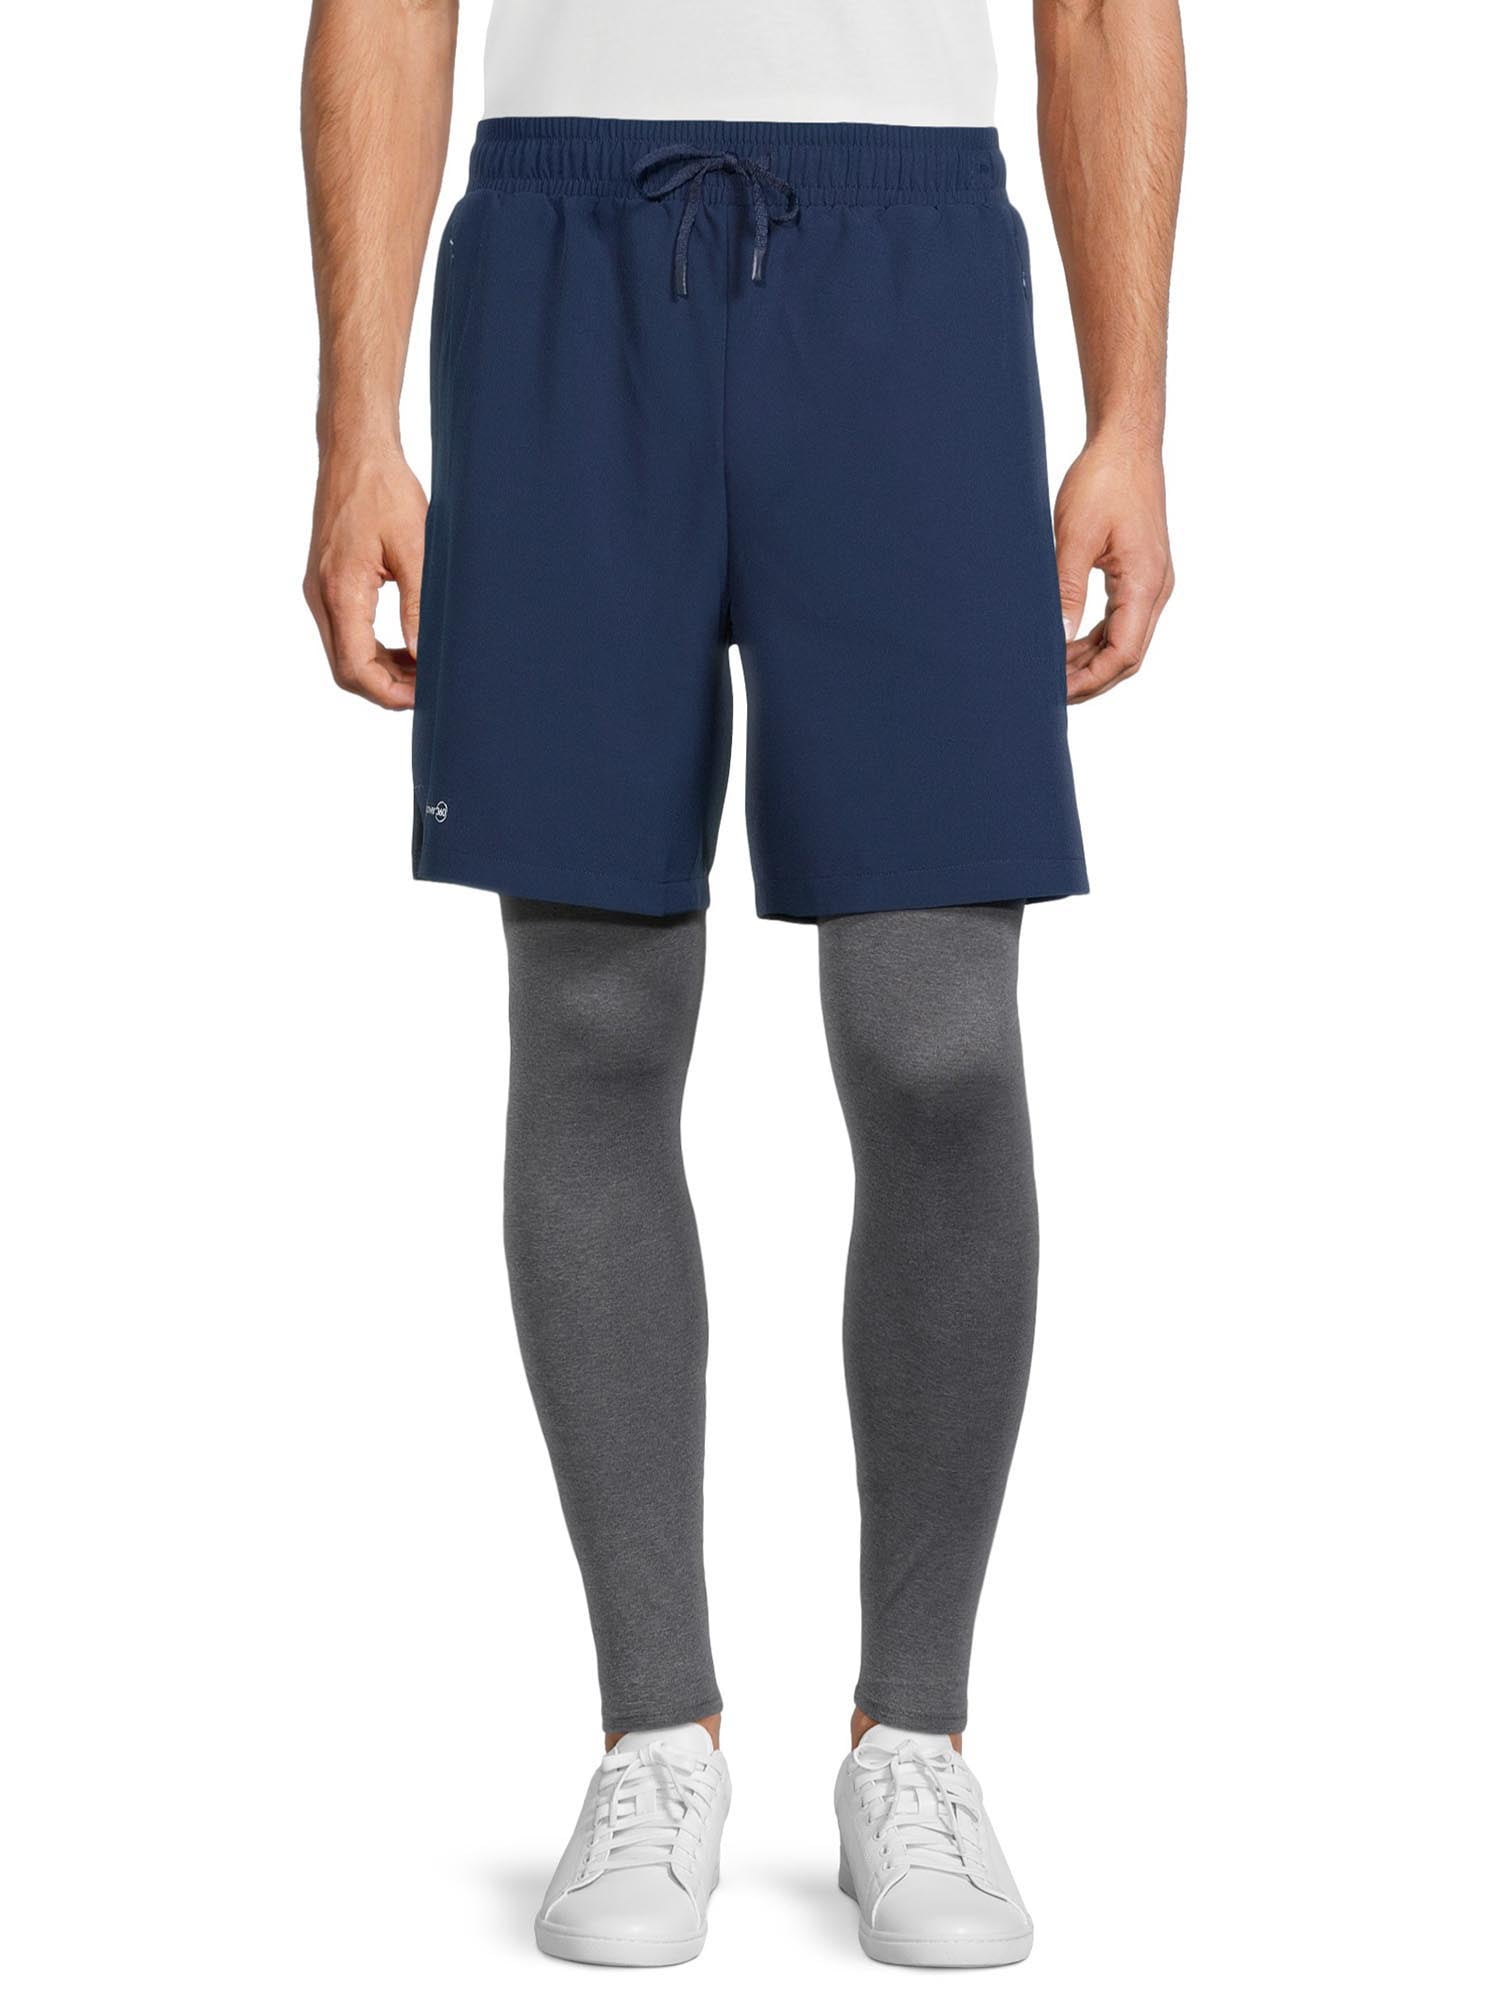 Russell Men's and Big Men's 2-in-1 Shorts with Compression Tights 